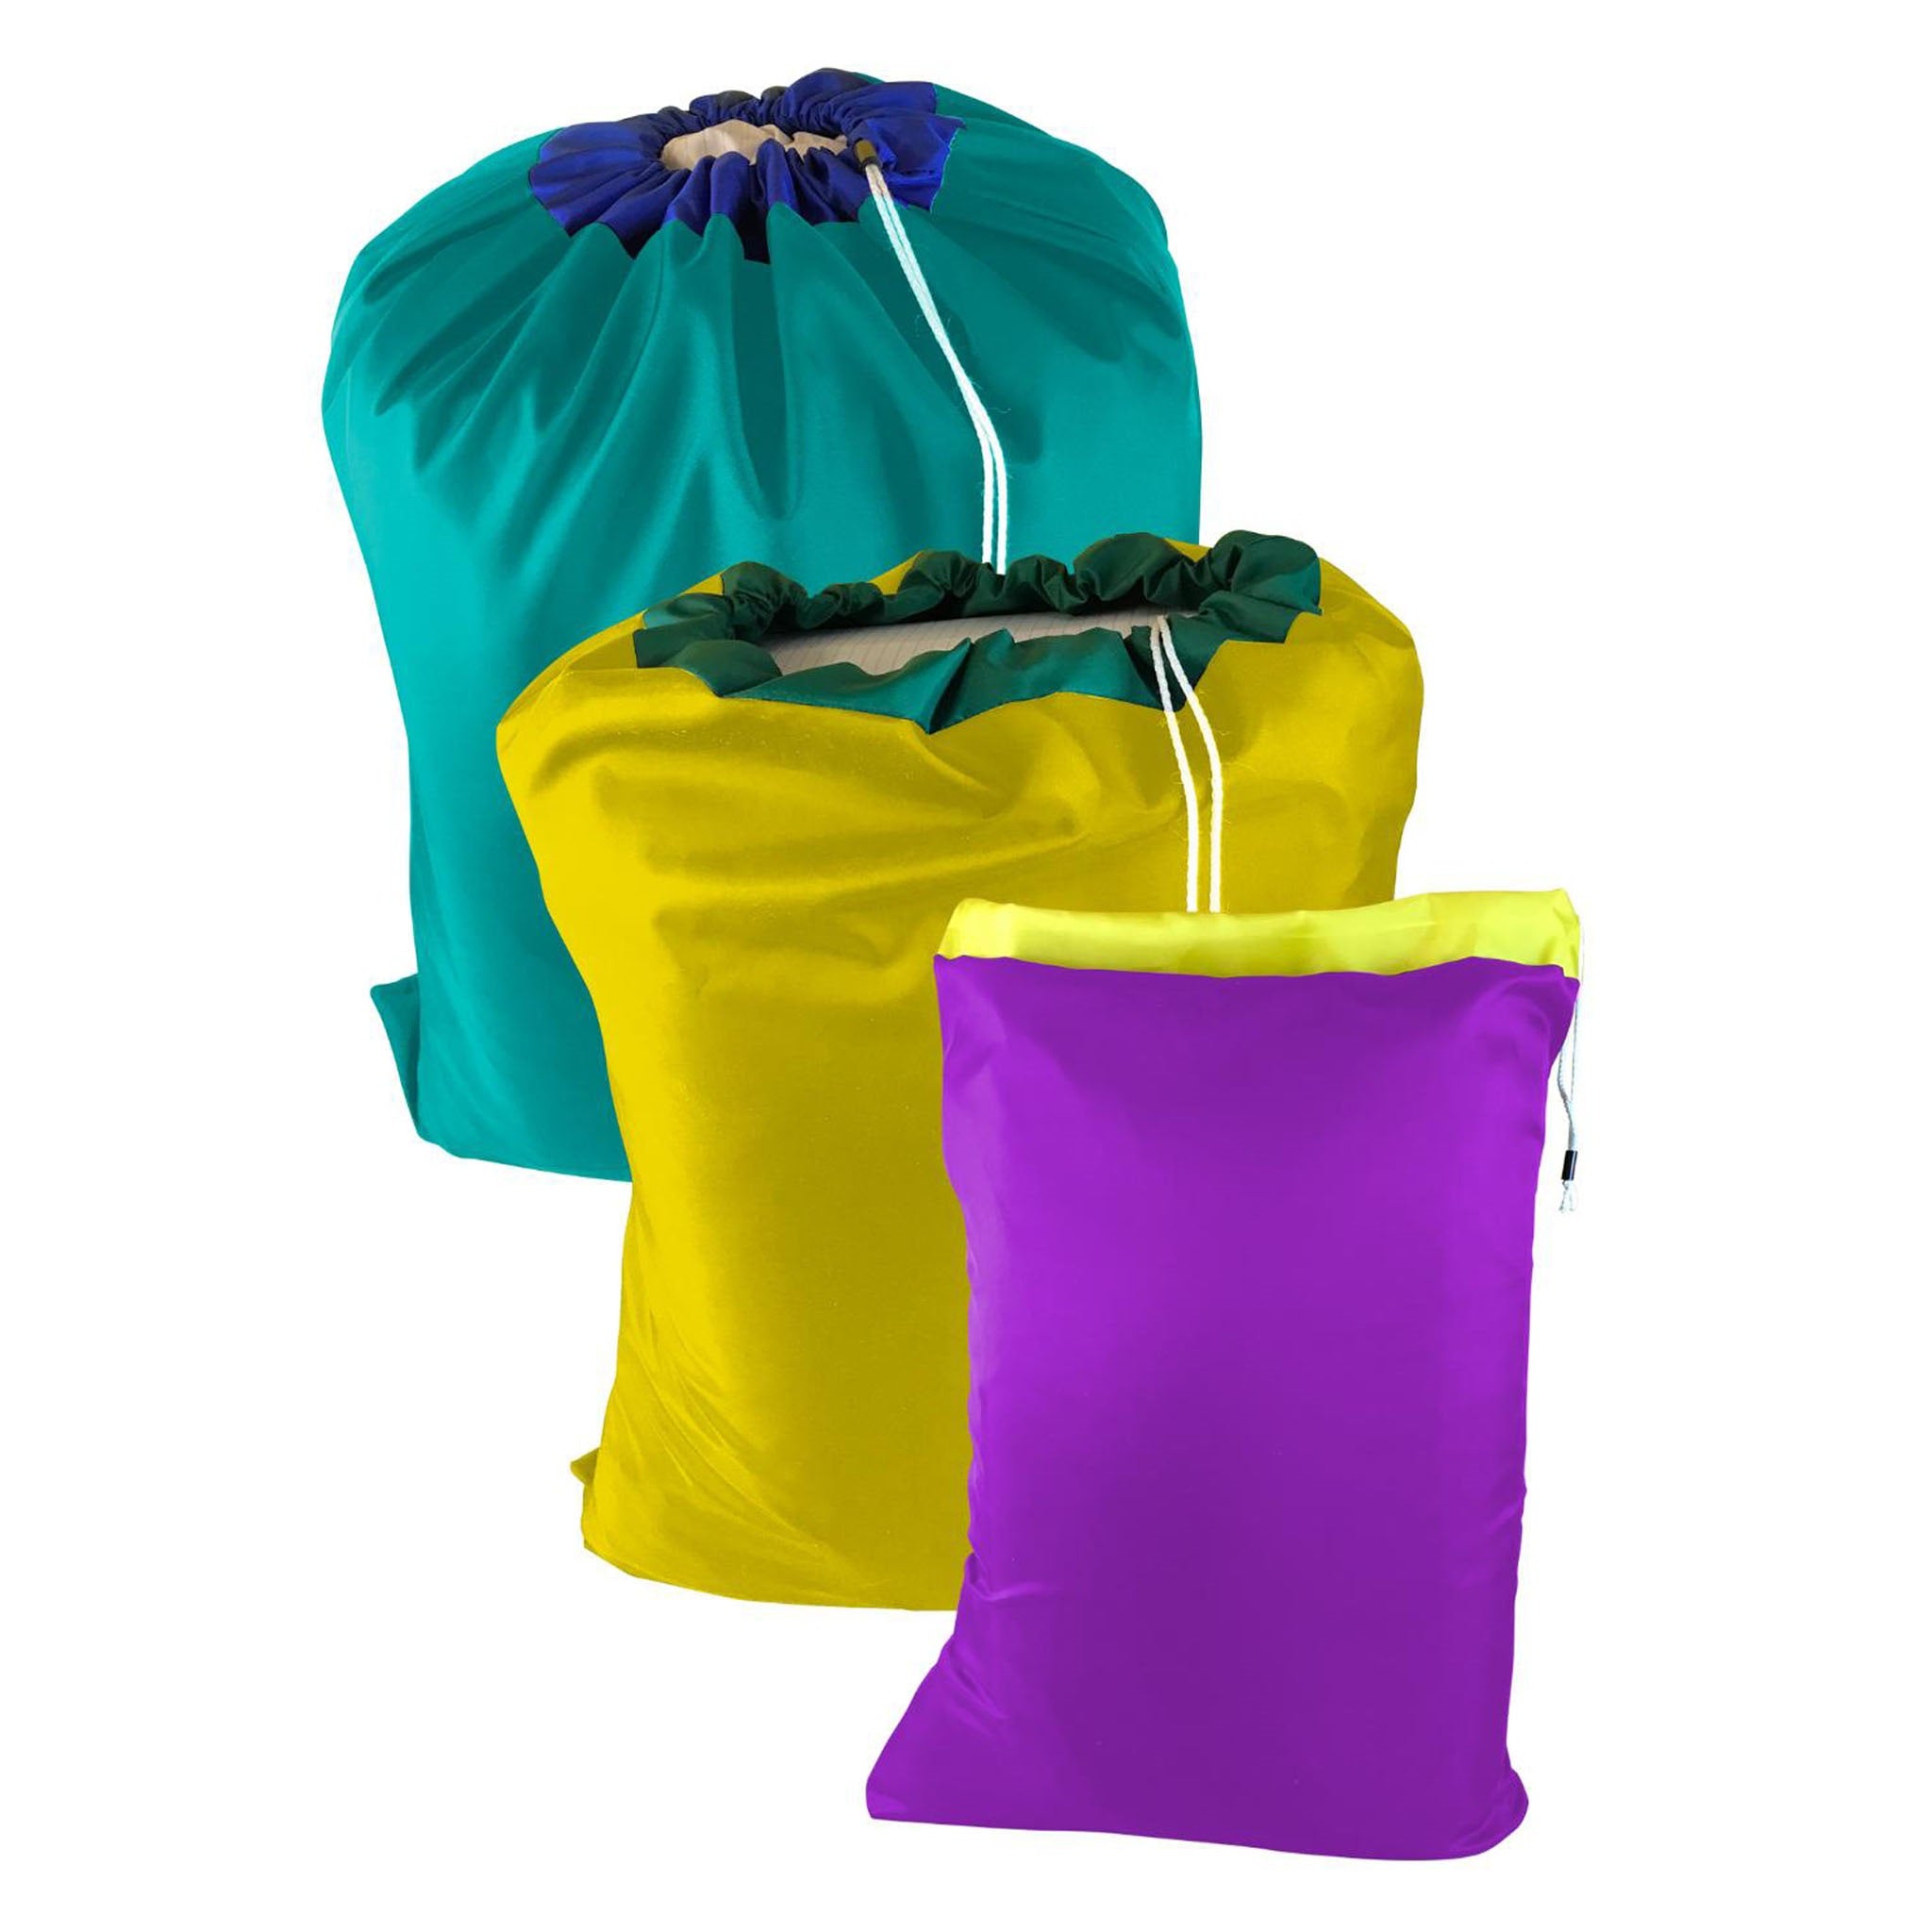 Shop Custom and Standard Laundry Bags Online 